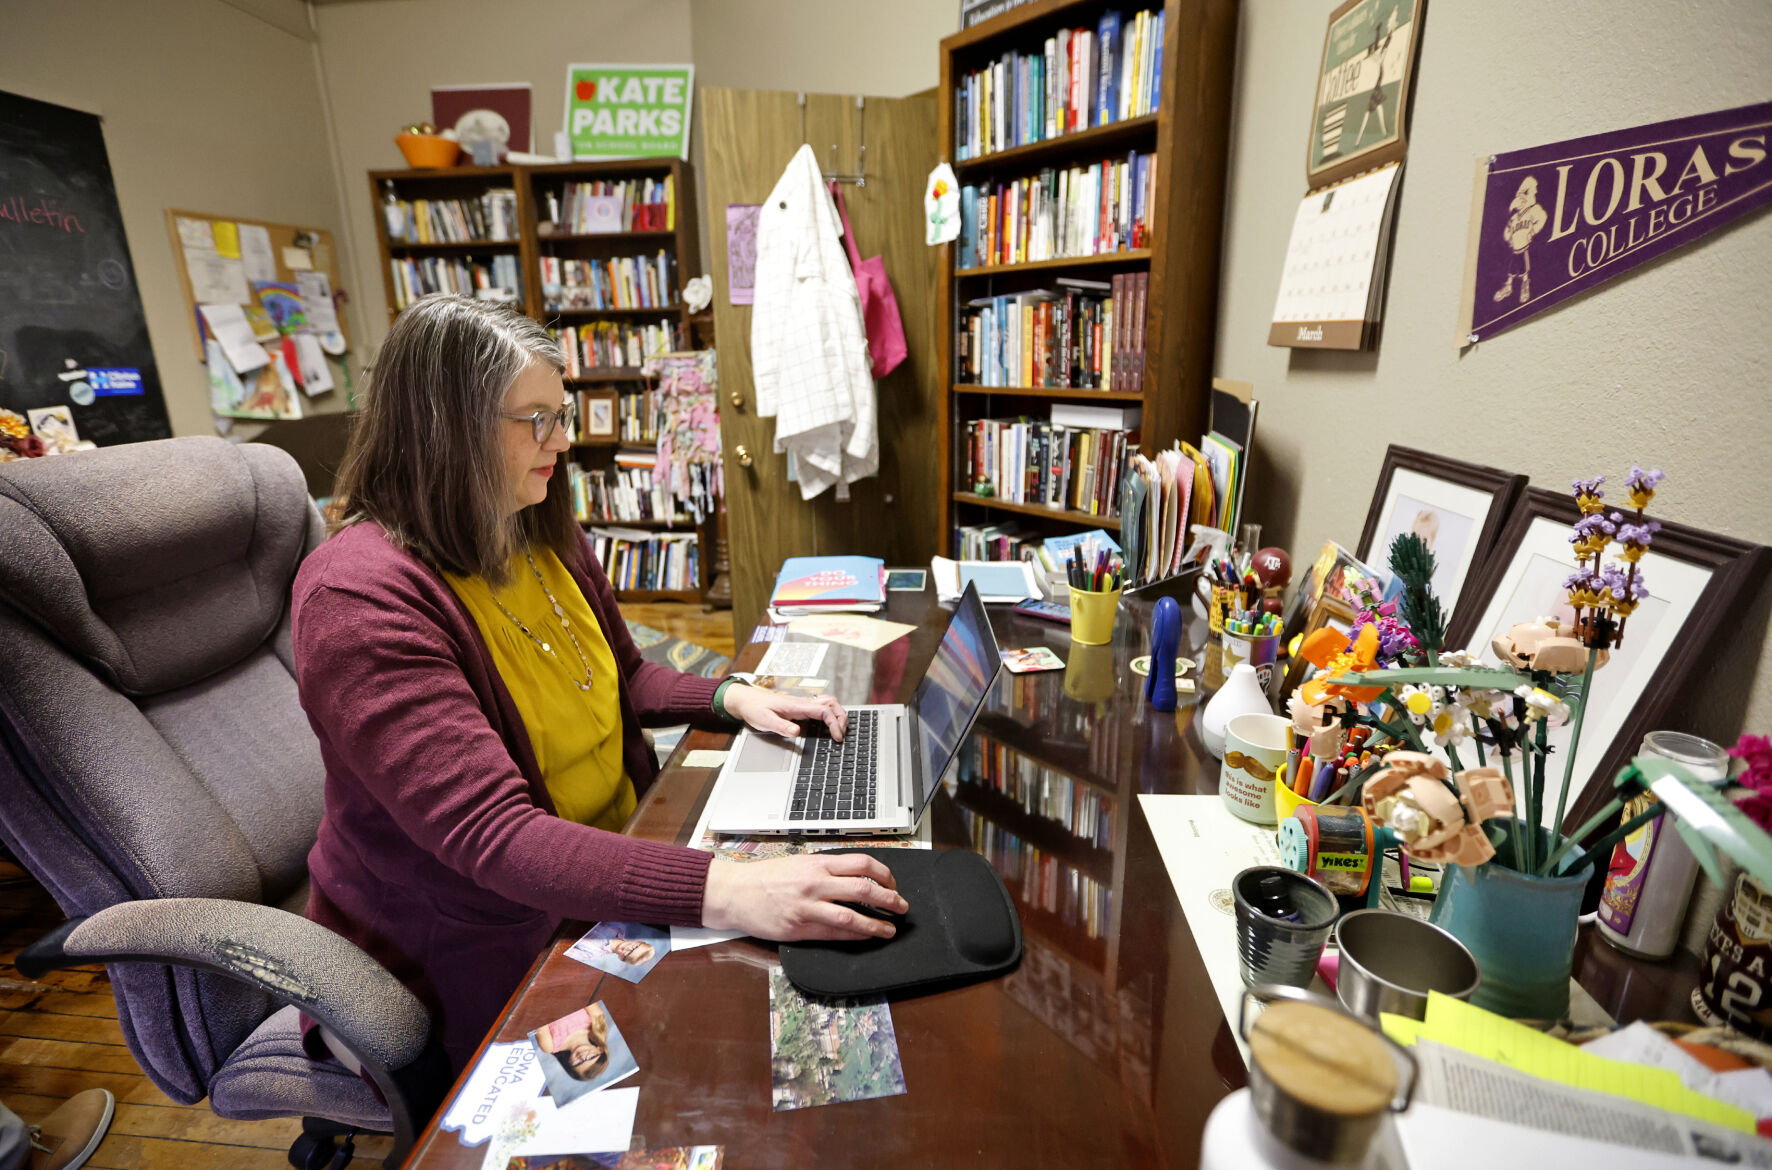 Parks looks over emails at Loras College in Dubuque. Parks is an associate professor of sociology at Loras.    PHOTO CREDIT: Jessica Reilly